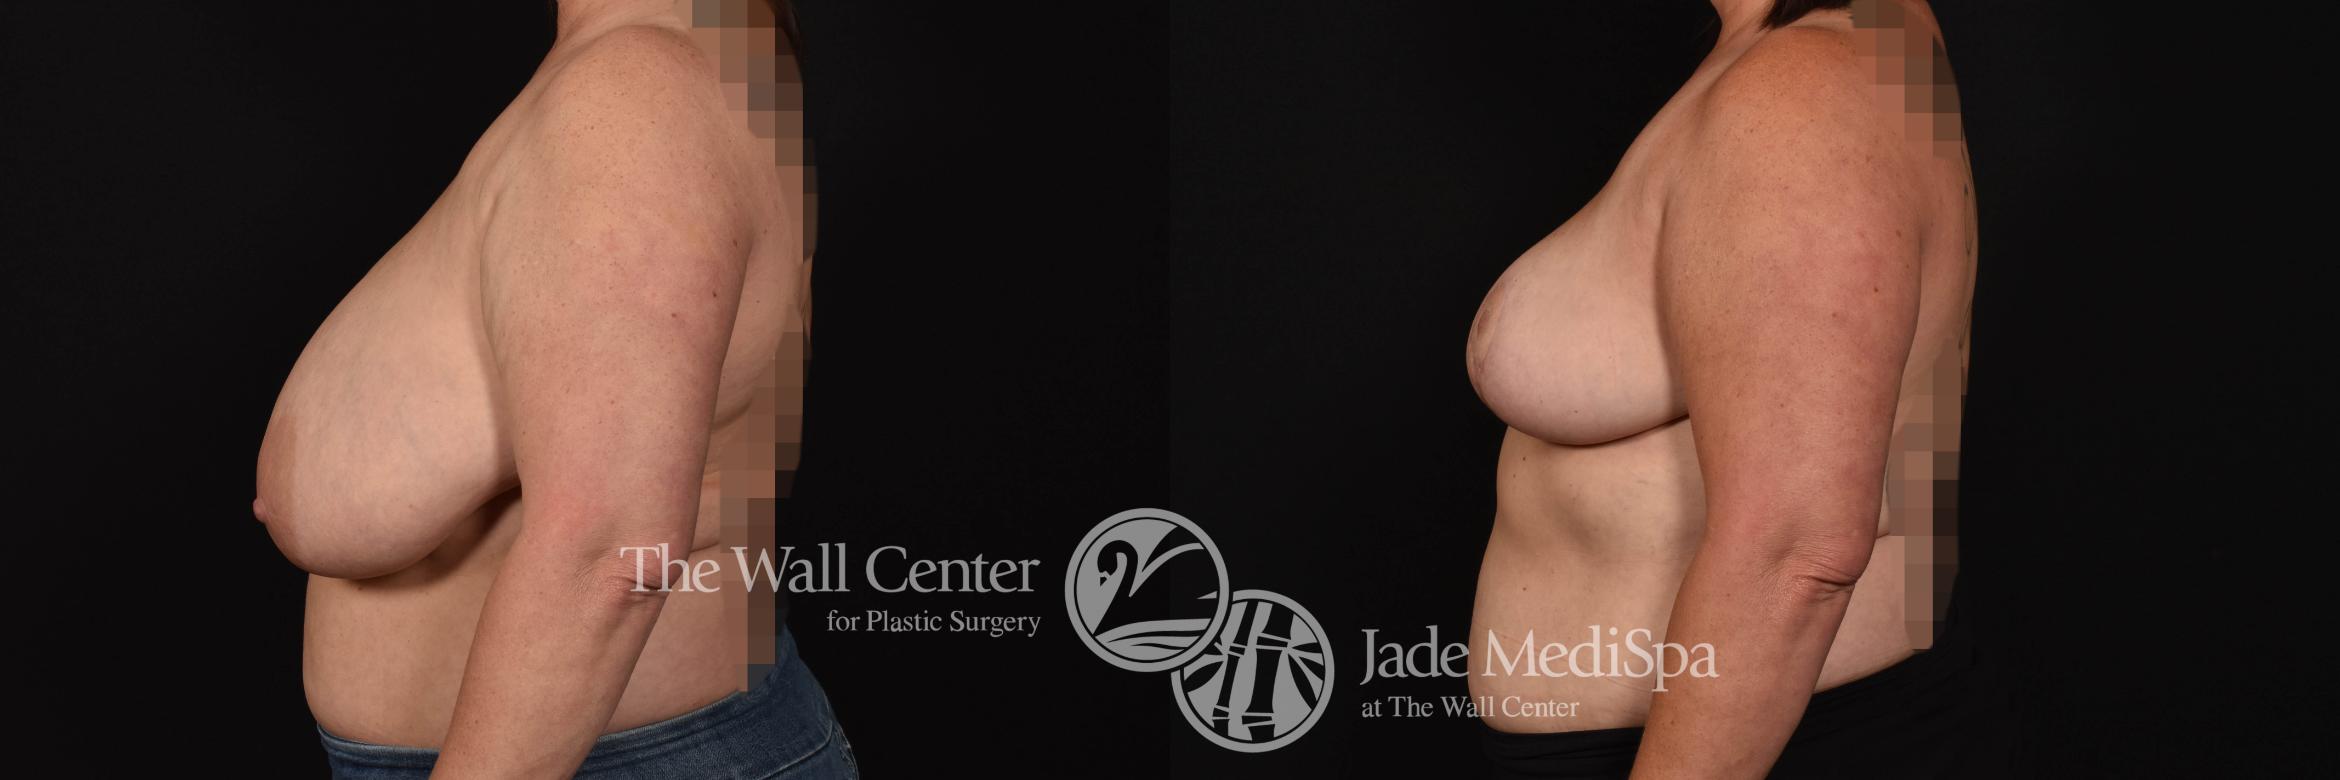 Breast Reduction Left Side Photo, Shreveport, Louisiana, The Wall Center for Plastic Surgery, Case 853